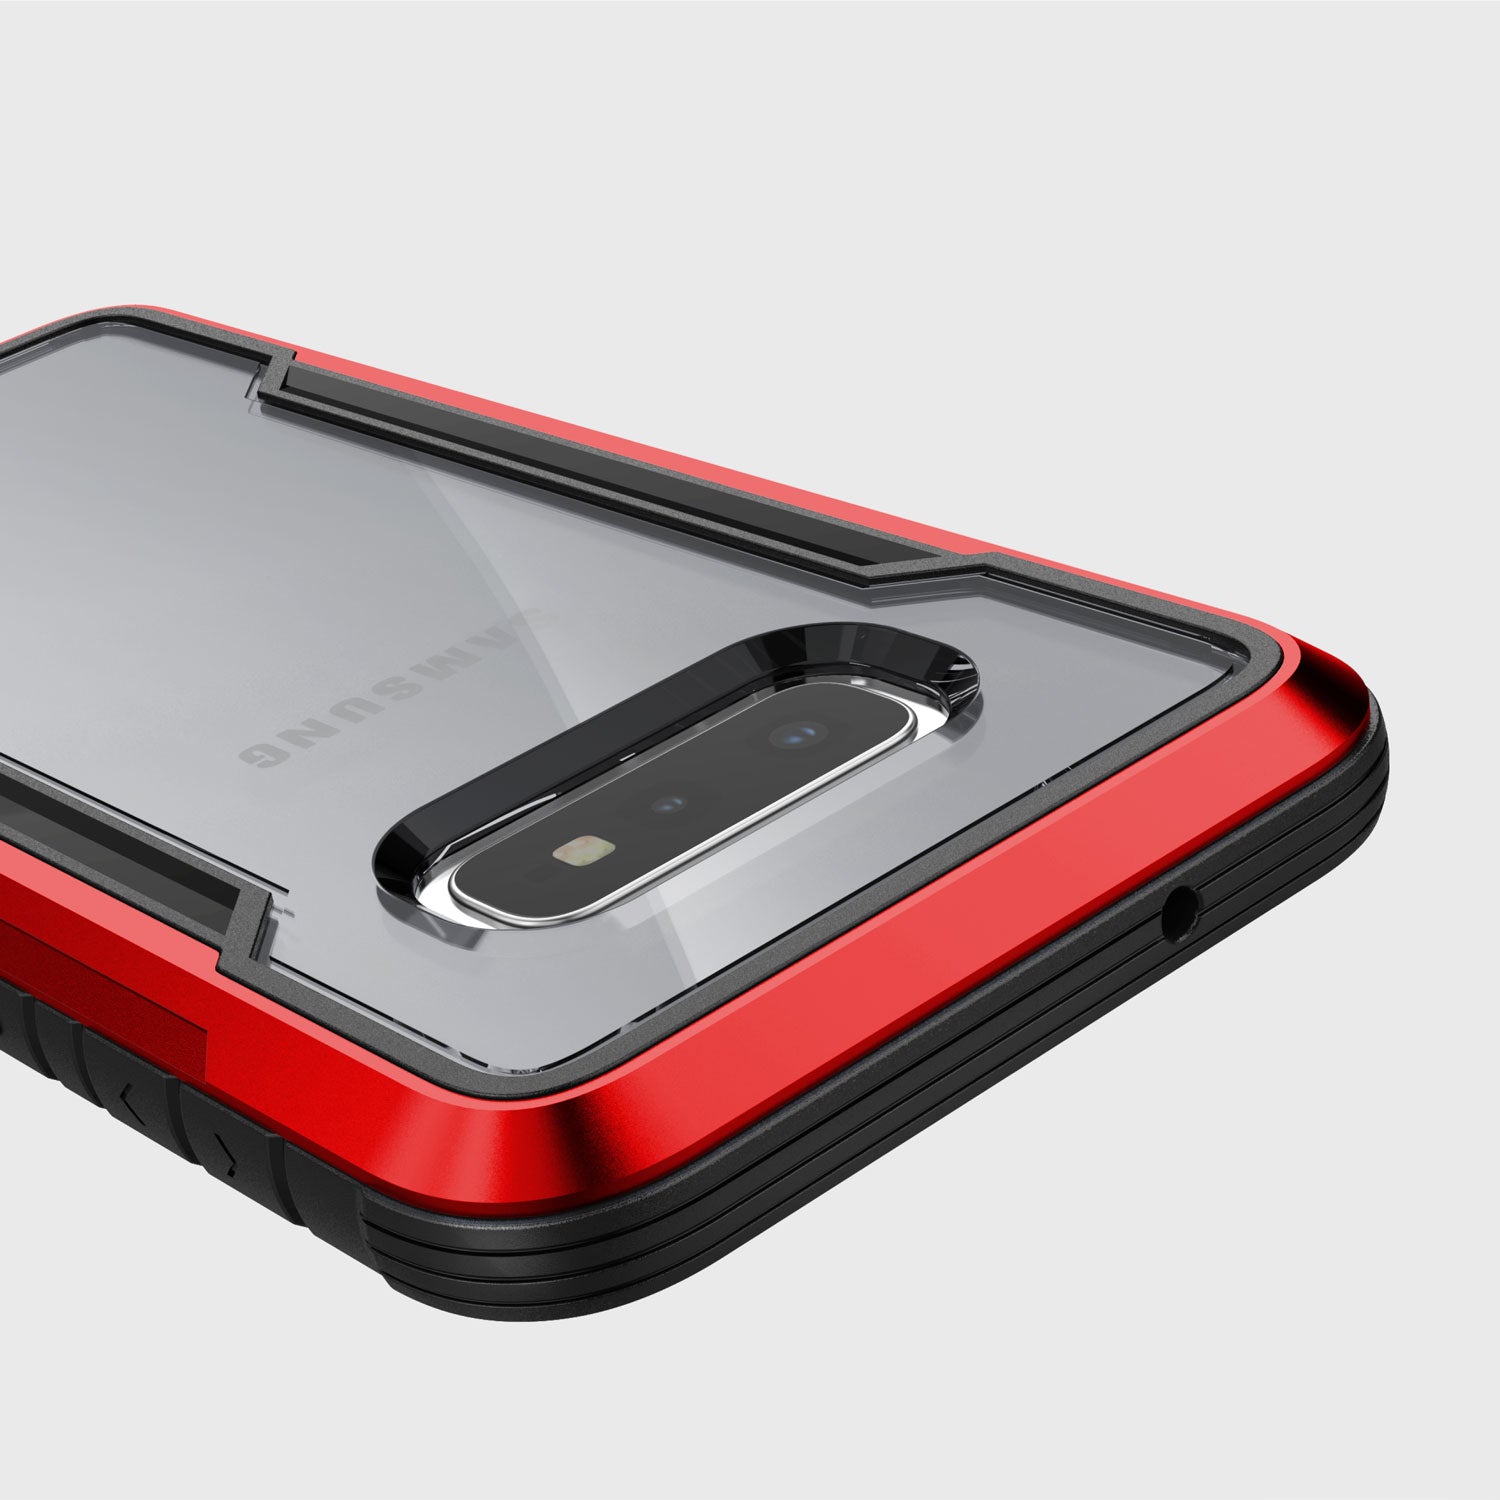 The red and black X-Doria Samsung Galaxy S10e Case Raptic Shield Red offers drop protection.